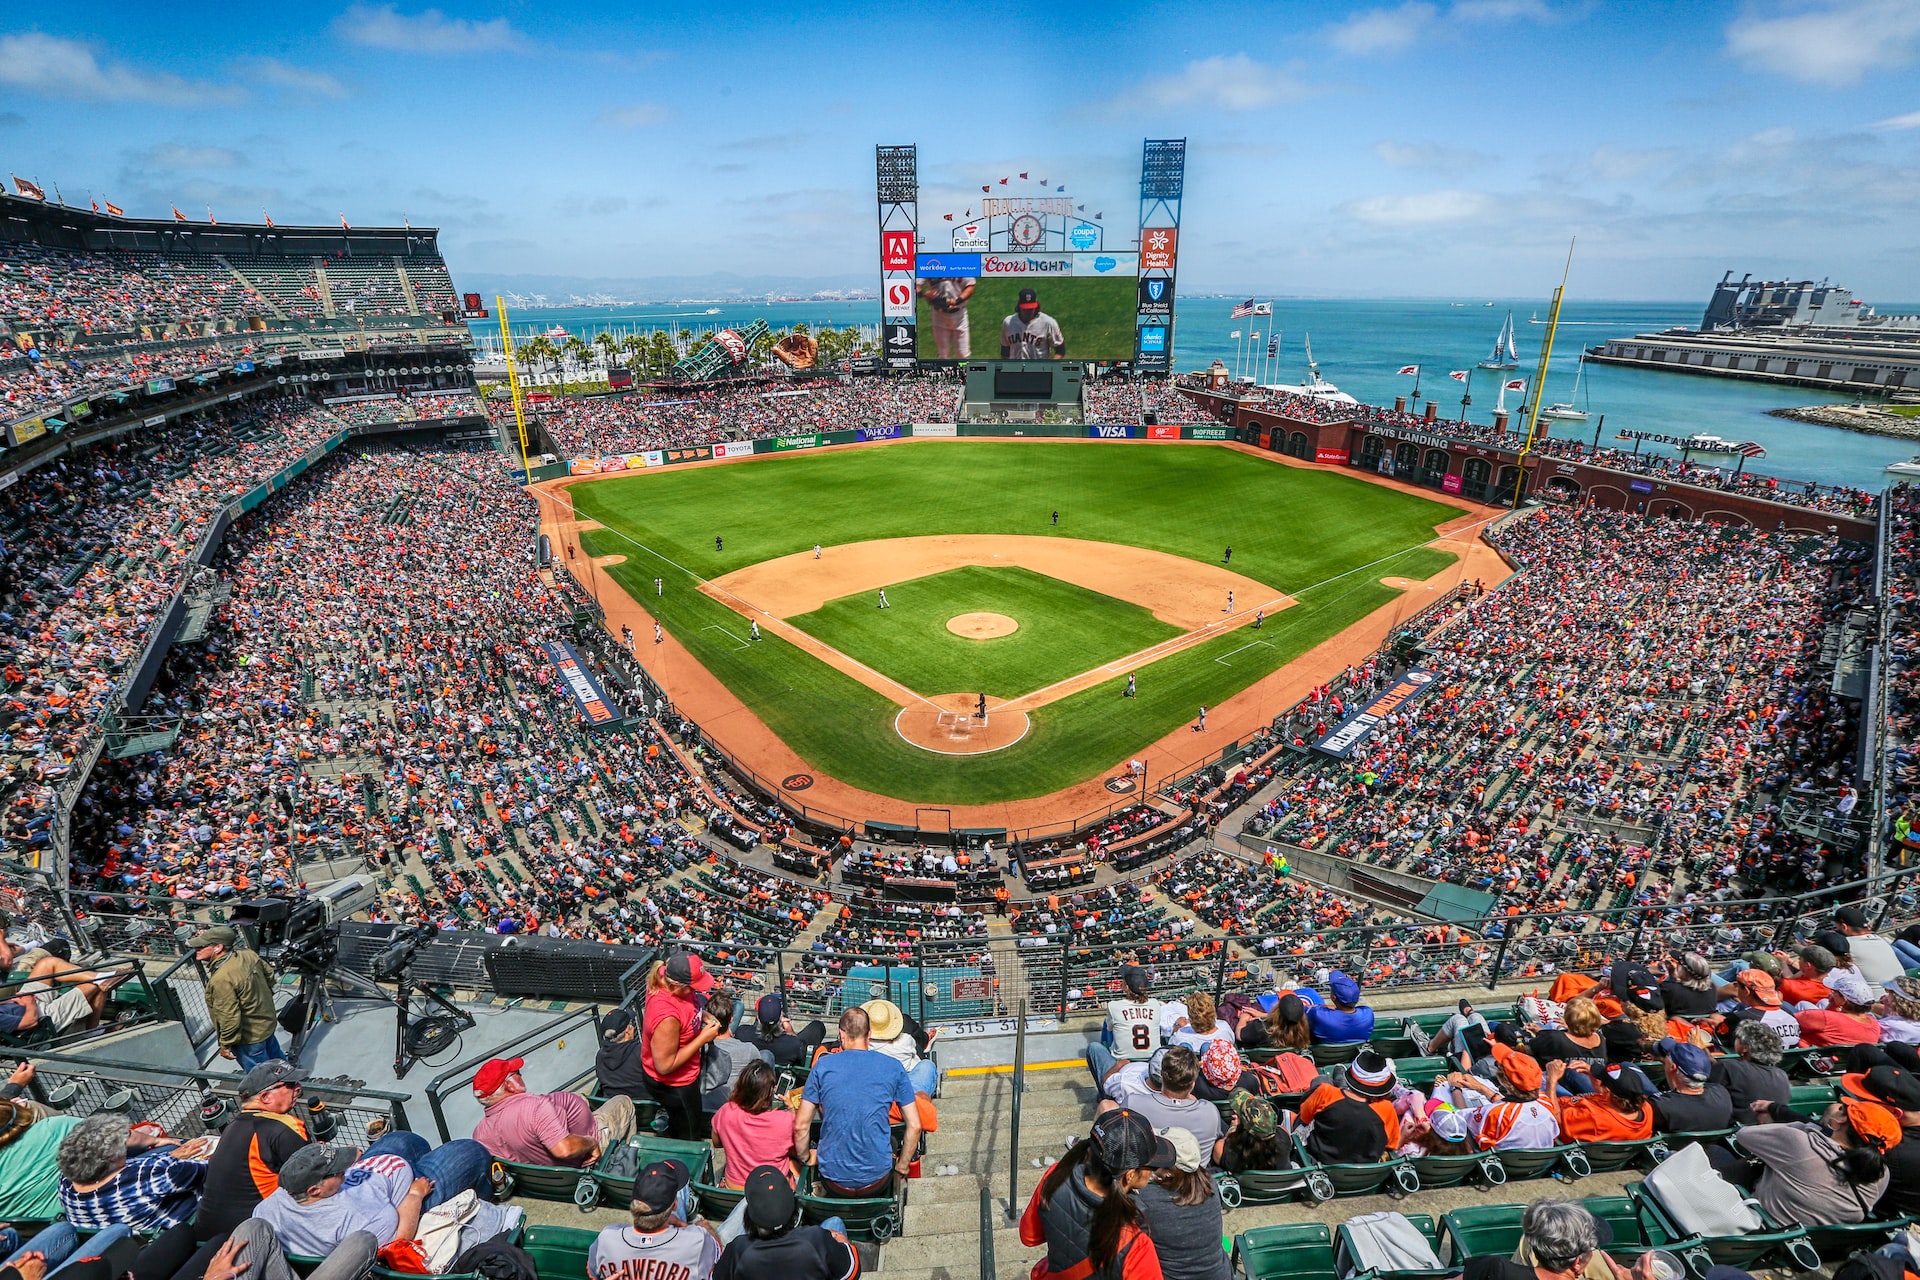 Oracle Park baseball stadium during a game..